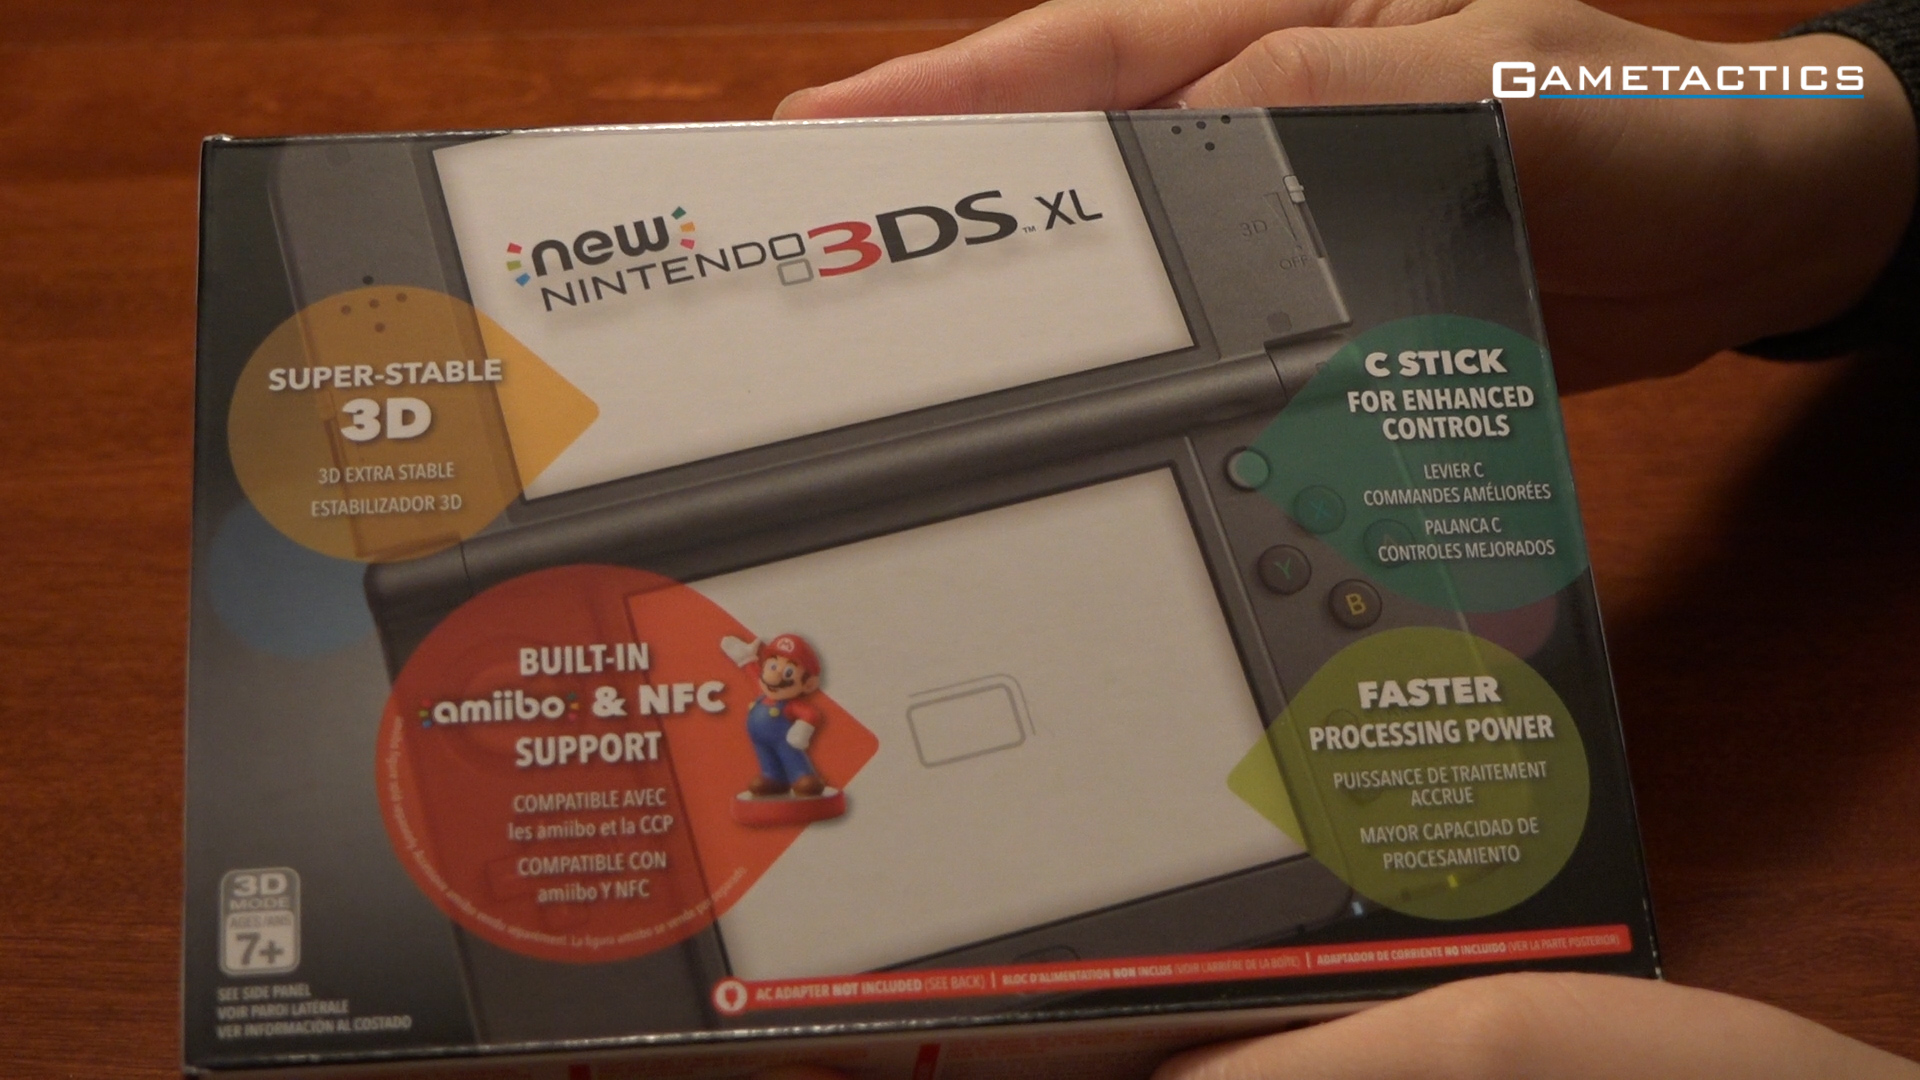 New Nintendo 3DS XL Unboxing Video of the Canada / U.S. Version